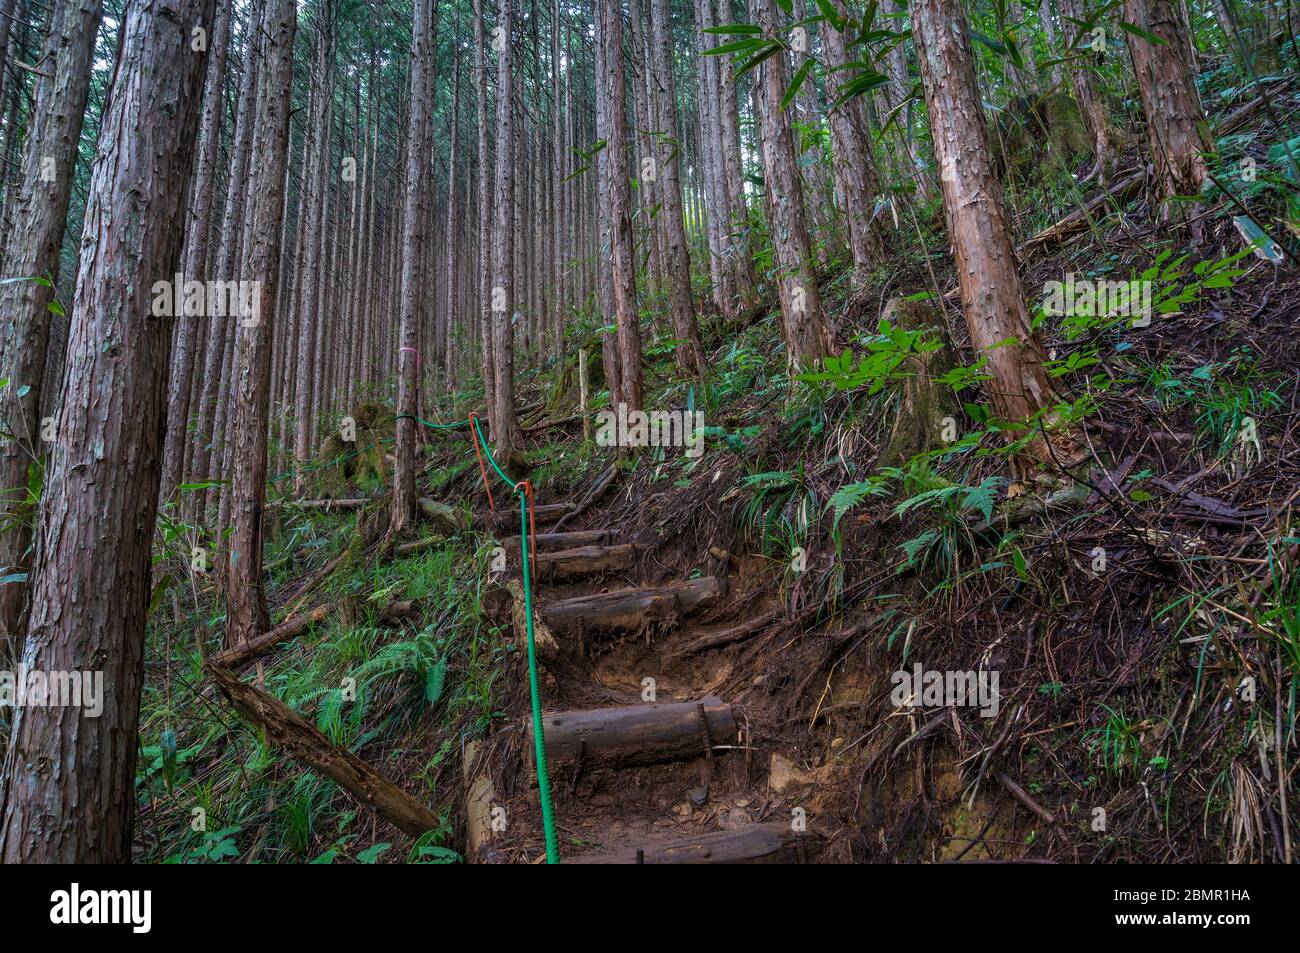 Hiking path in coniferous forest. Pine trees trunks and hiking path with steps. Temperate coniferous forest Stock Photo